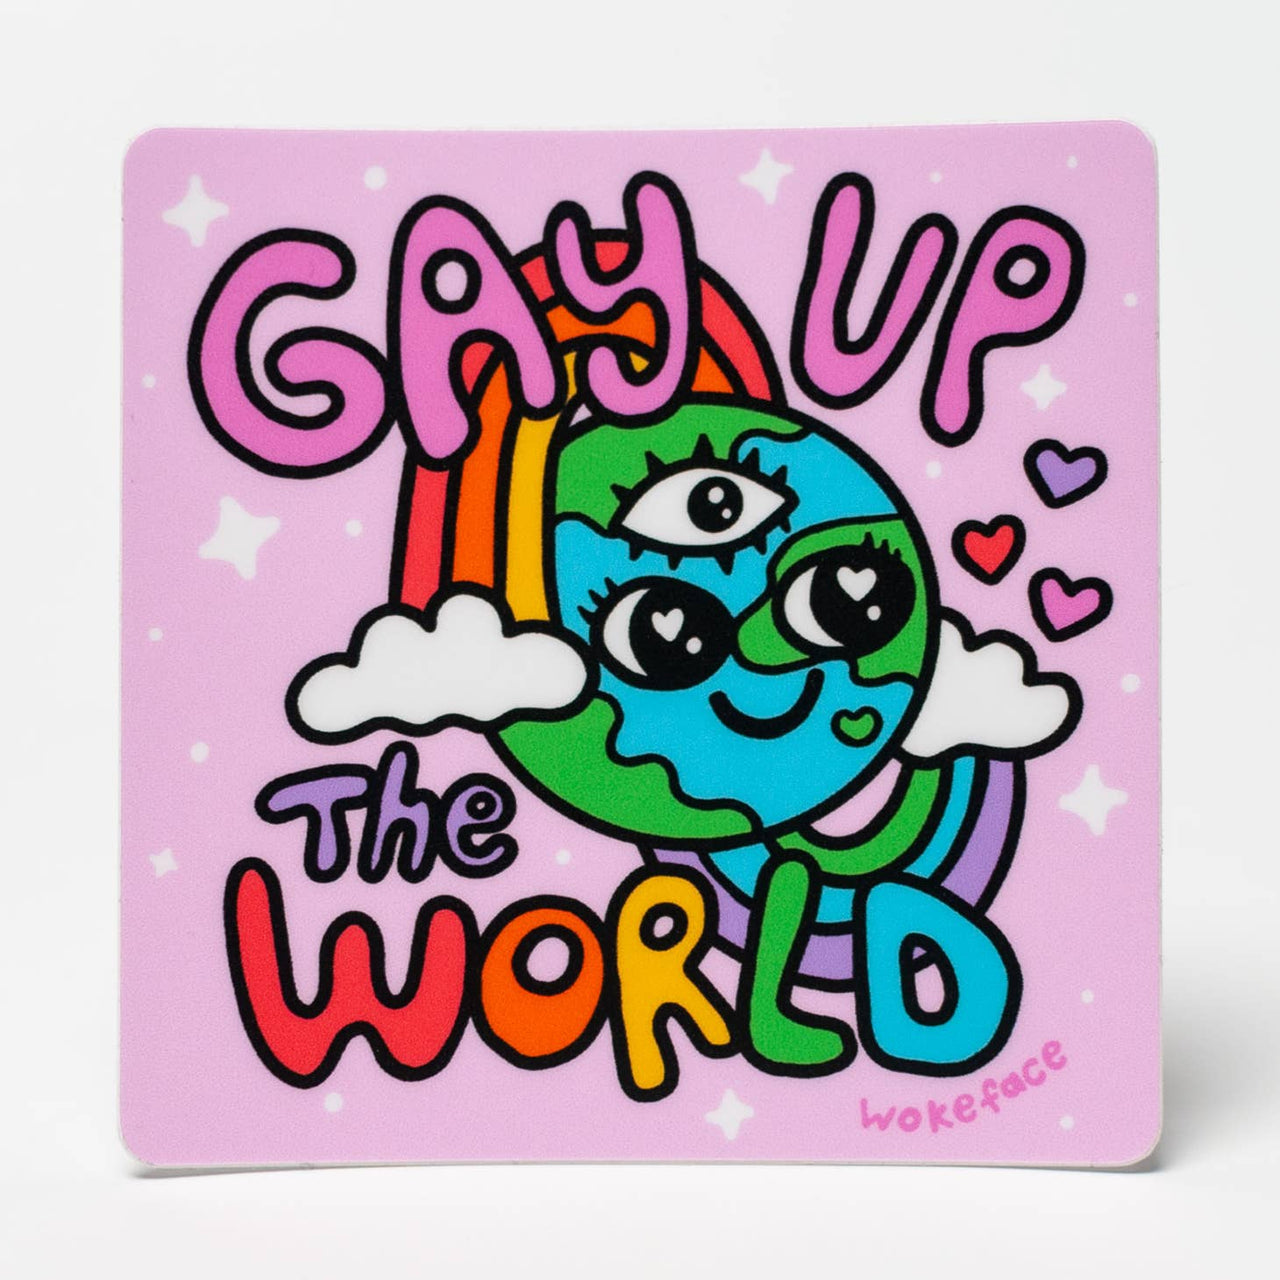 Wokeface - Gay Up the World Sticker